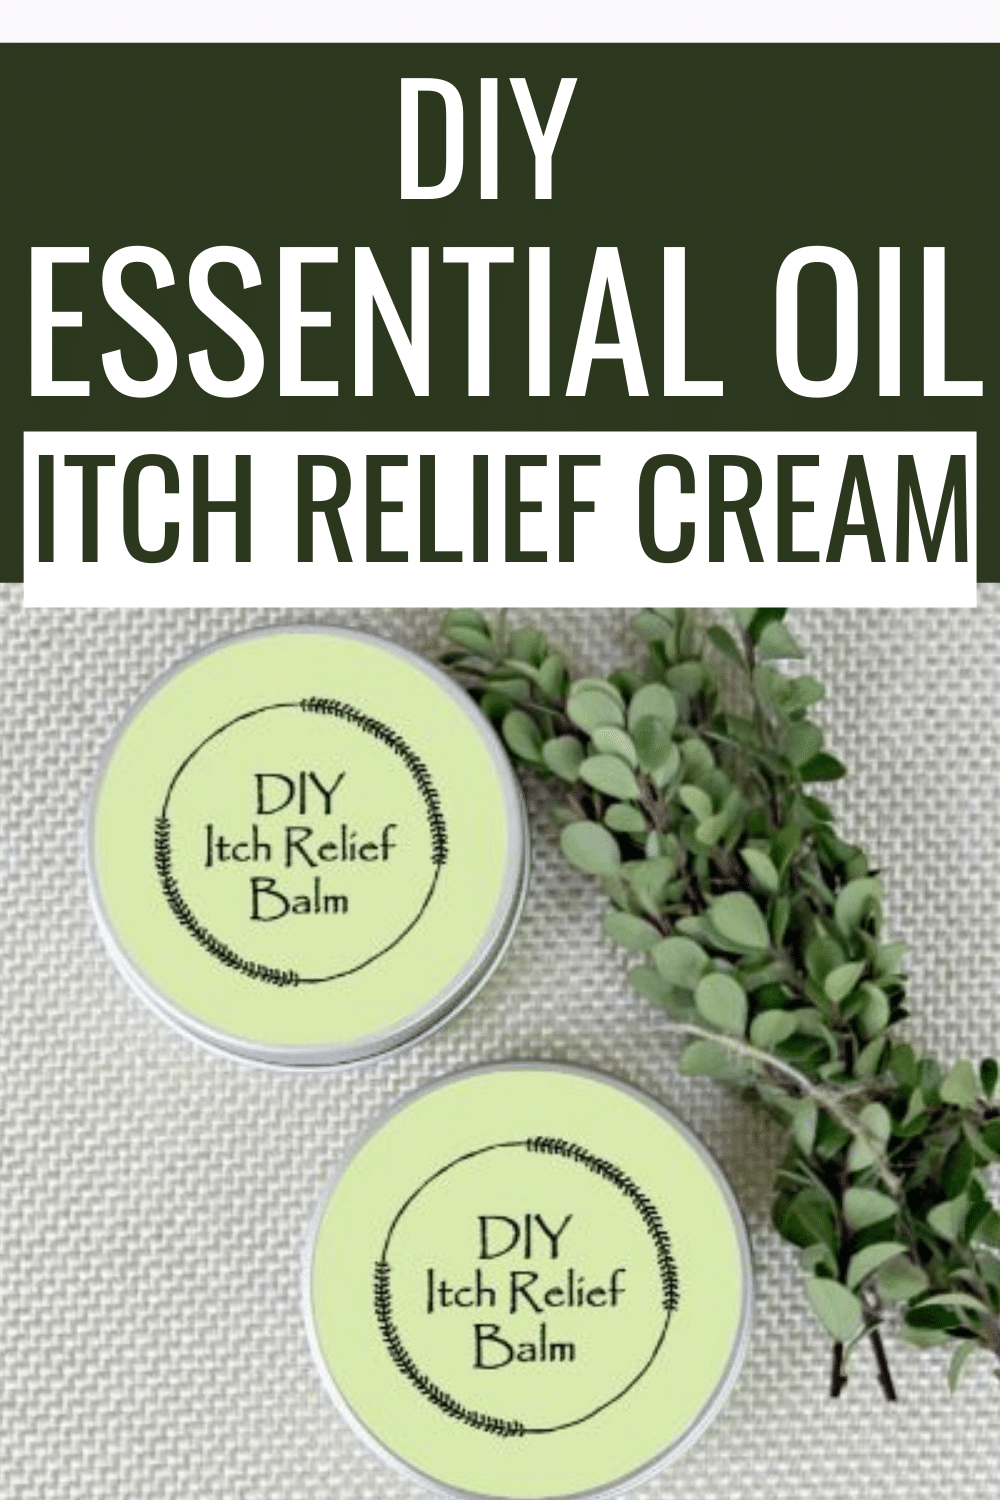 This essential oil itch relief cream is quick to make and can help sooth bug bites, small rashes and itchy skin areas. Grab a printable lid label too! #essentialoils #skin #diy via @wondermomwannab